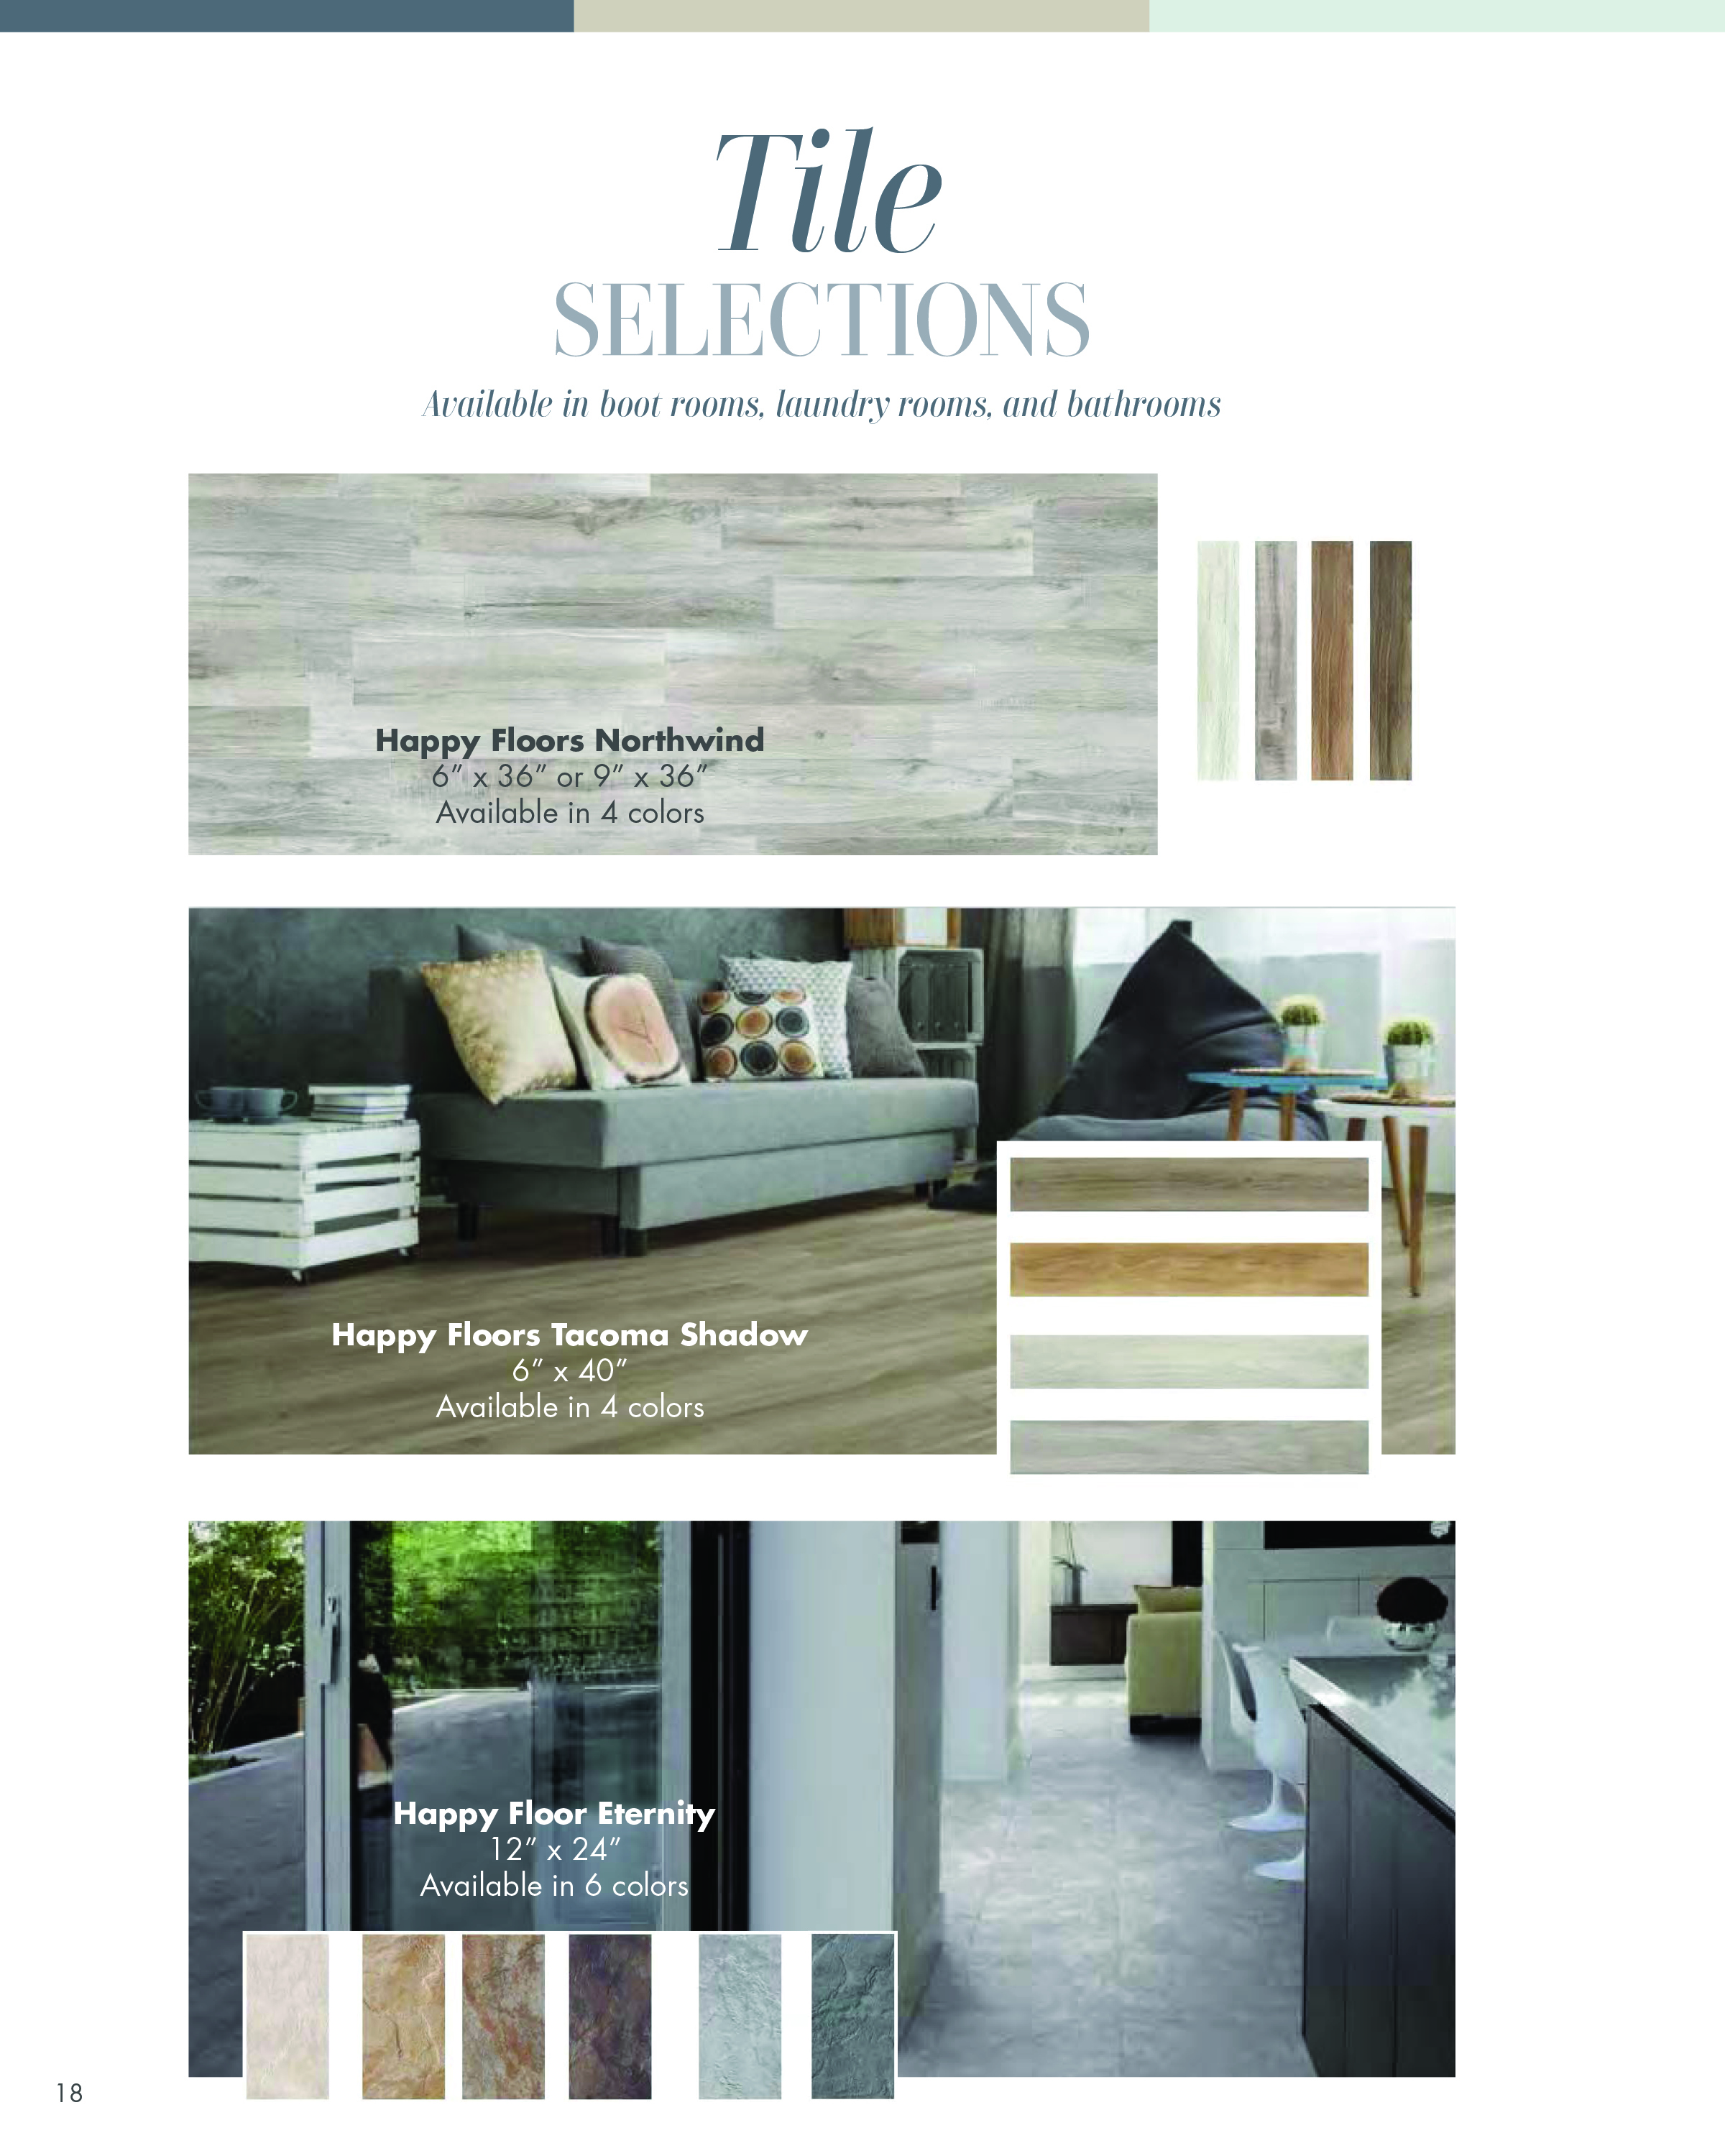 Cottages of Prairie's Edge Lookbook & Selection Guide18.jpg